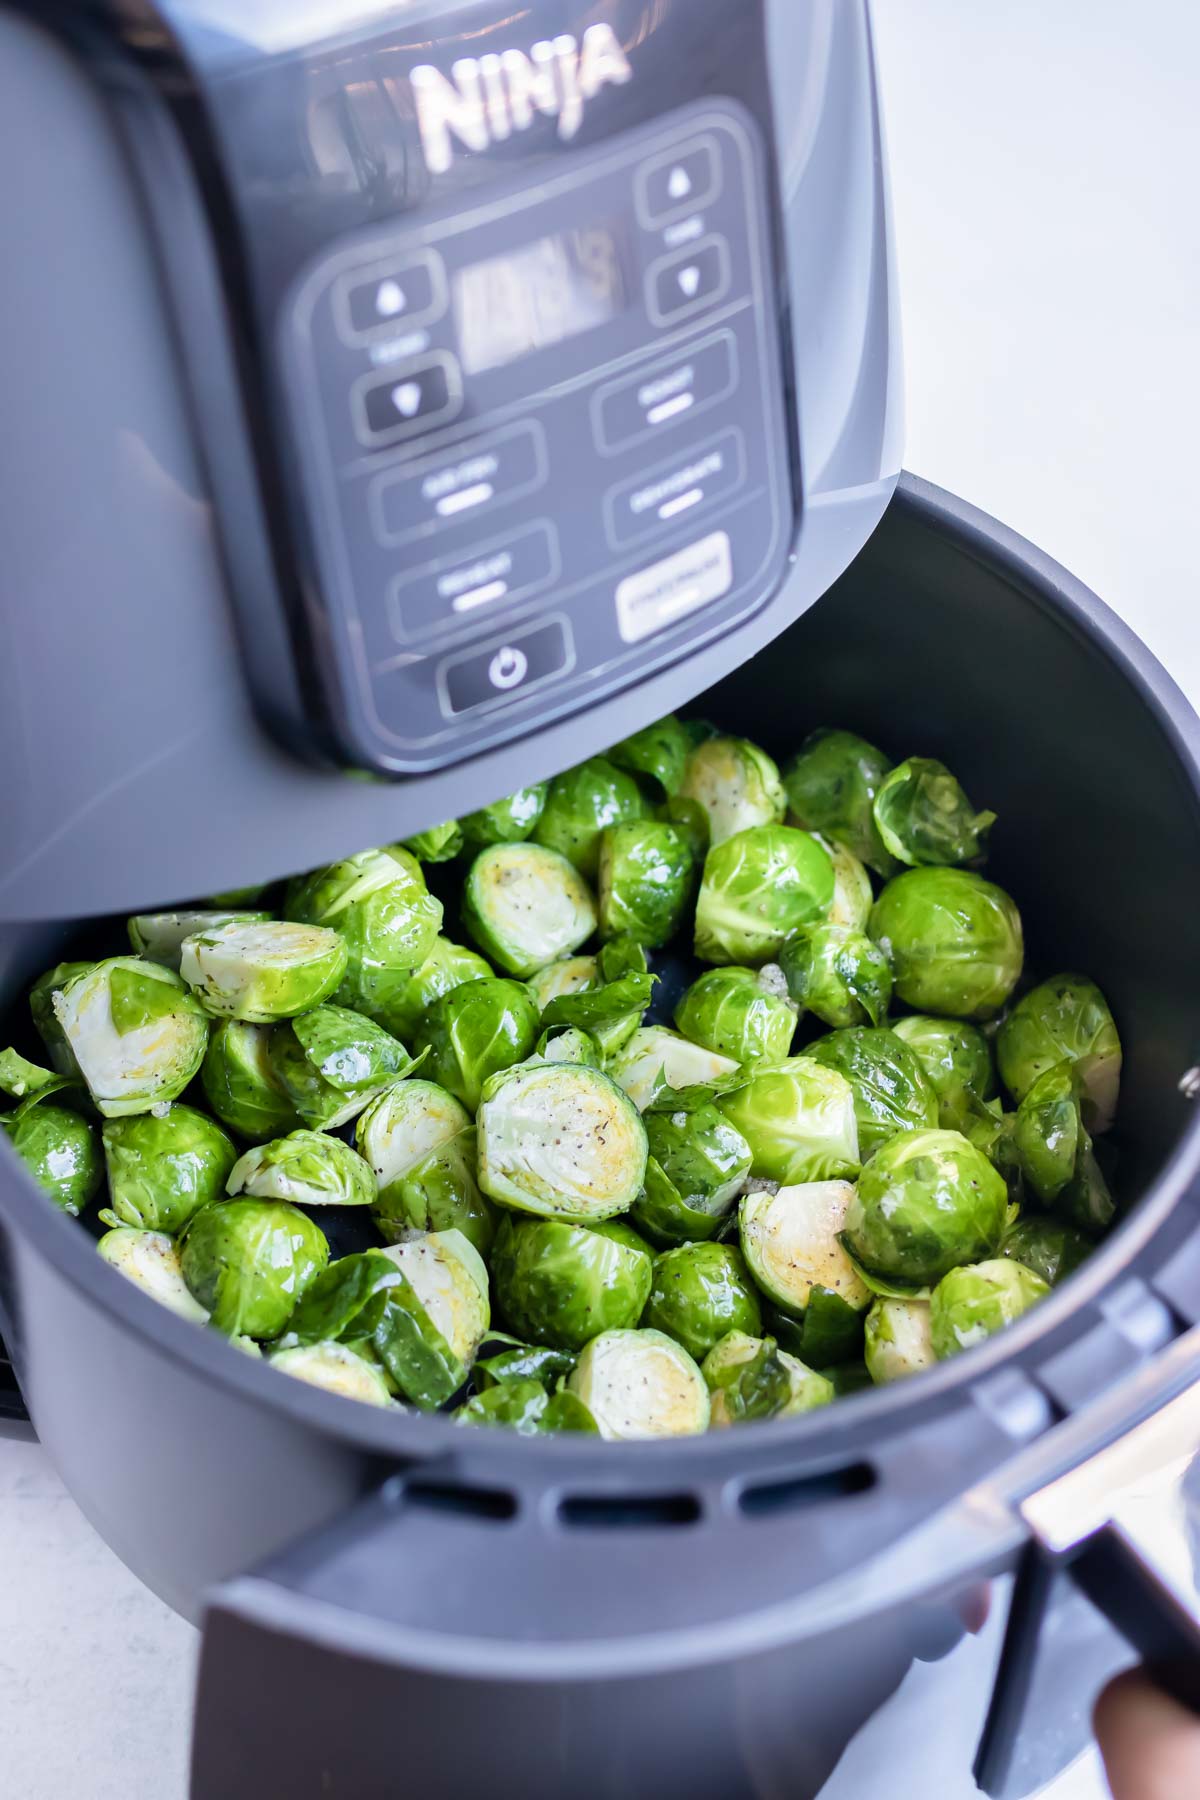 Brussels sprouts are cooked in a Ninja air fryer.